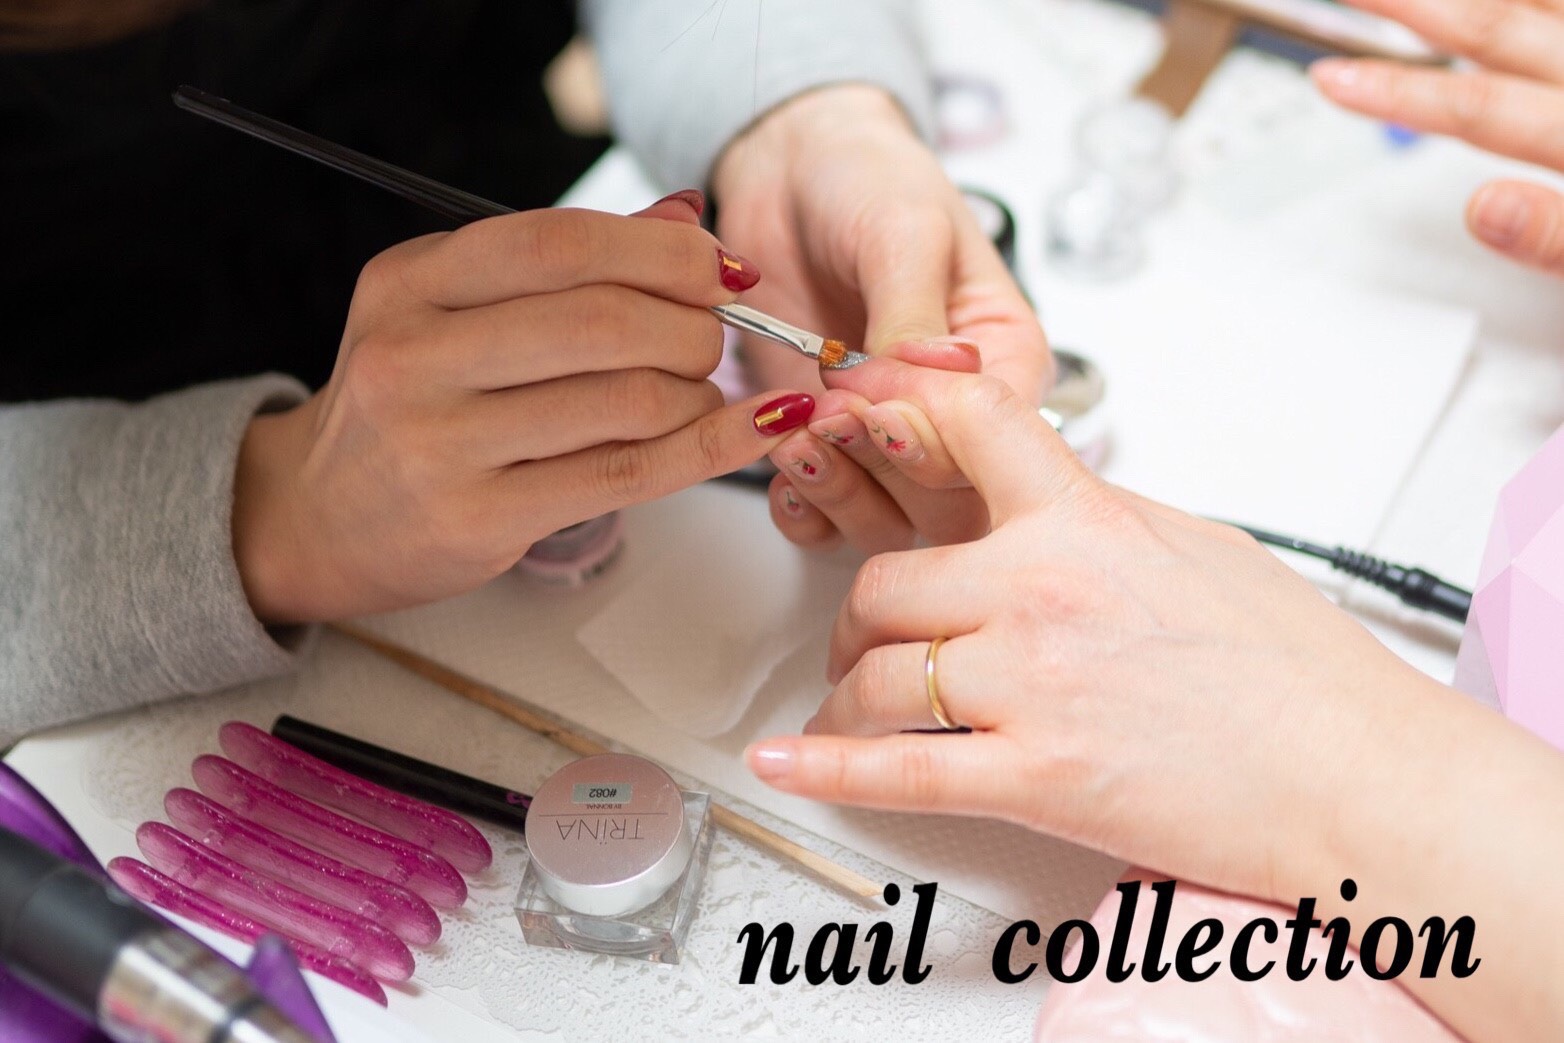 Nail Collection いわき市自由ヶ丘にあるネイルサロン Cocolinkいわき いわき市の地域情報サイト